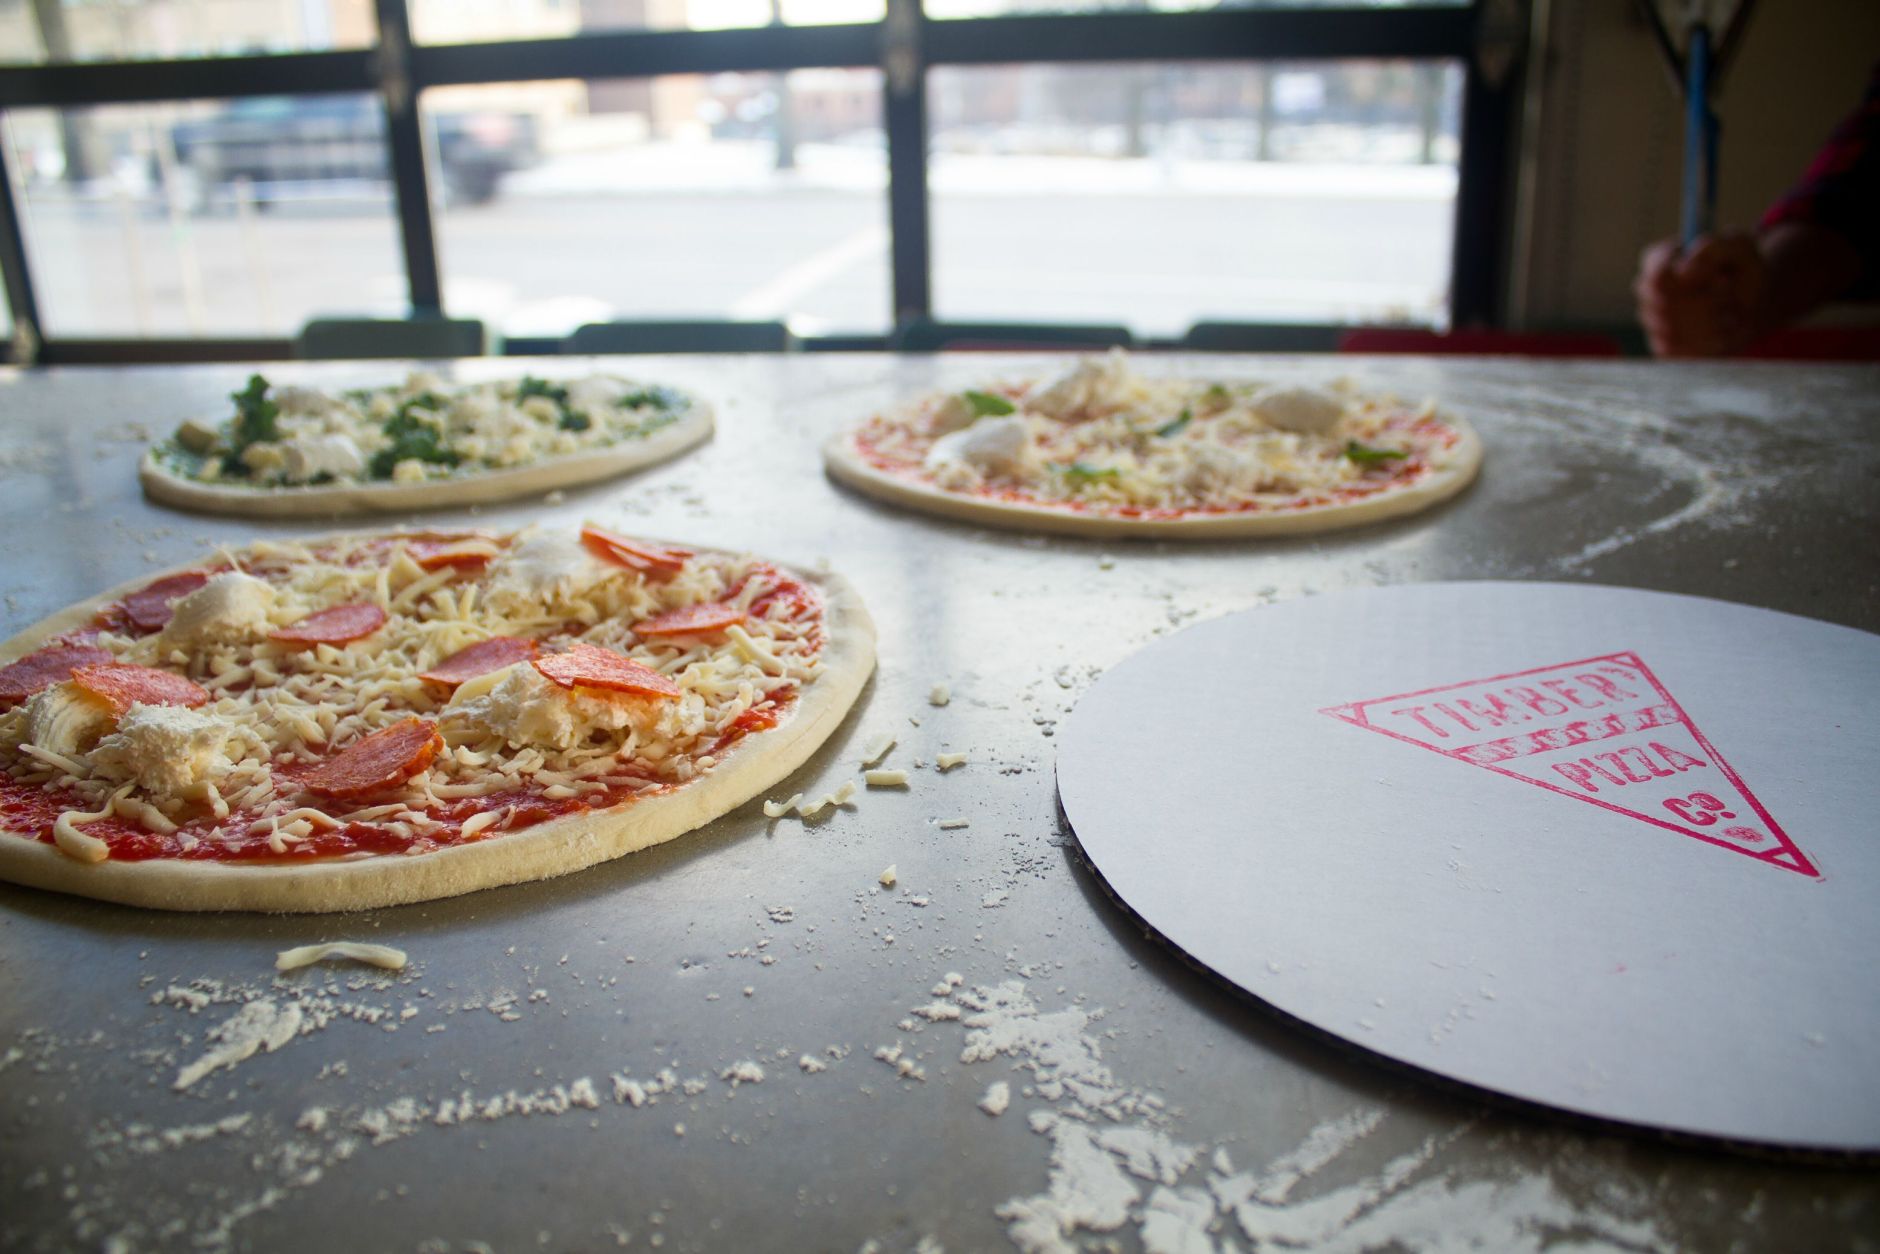 <p><strong>$15: </strong><span style="font-weight: 400;">Head to D.C.’s Petworth neighborhood for some of the best pizza the city has to offer. And while you can’t go wrong with any of the pies on <a href="http://www.timberpizza.com/" target="_blank" rel="noopener">Timber’s</a> (809 Upshur St. NW) menu, The Julia is sure to please, with provolone, mozzarella, sugar snap peas, pea shoot pesto, pea shoot salad, honey-lemon dressing and sesame seeds. — Rachel Nania</span></p>
<p><span style="font-weight: 400;"><strong>$15:</strong> There are movies, then there is the experience of walking beneath the relics of the American space program on your way into a stadium IMAX to watch a science fiction flick at the <a href="https://airandspace.si.edu/theater-type/lockheed-martin-imax-theater" target="_blank" rel="noopener">Smithsonian National Air and Space Museum</a> (600 Independence Ave. SW). It is a uniquely D.C. experience, it’s less expensive than some other IMAX options, and it’s the only way I’ll ever watch another Star Wars movie as long as I live here. — Noah Frank</span></p>
